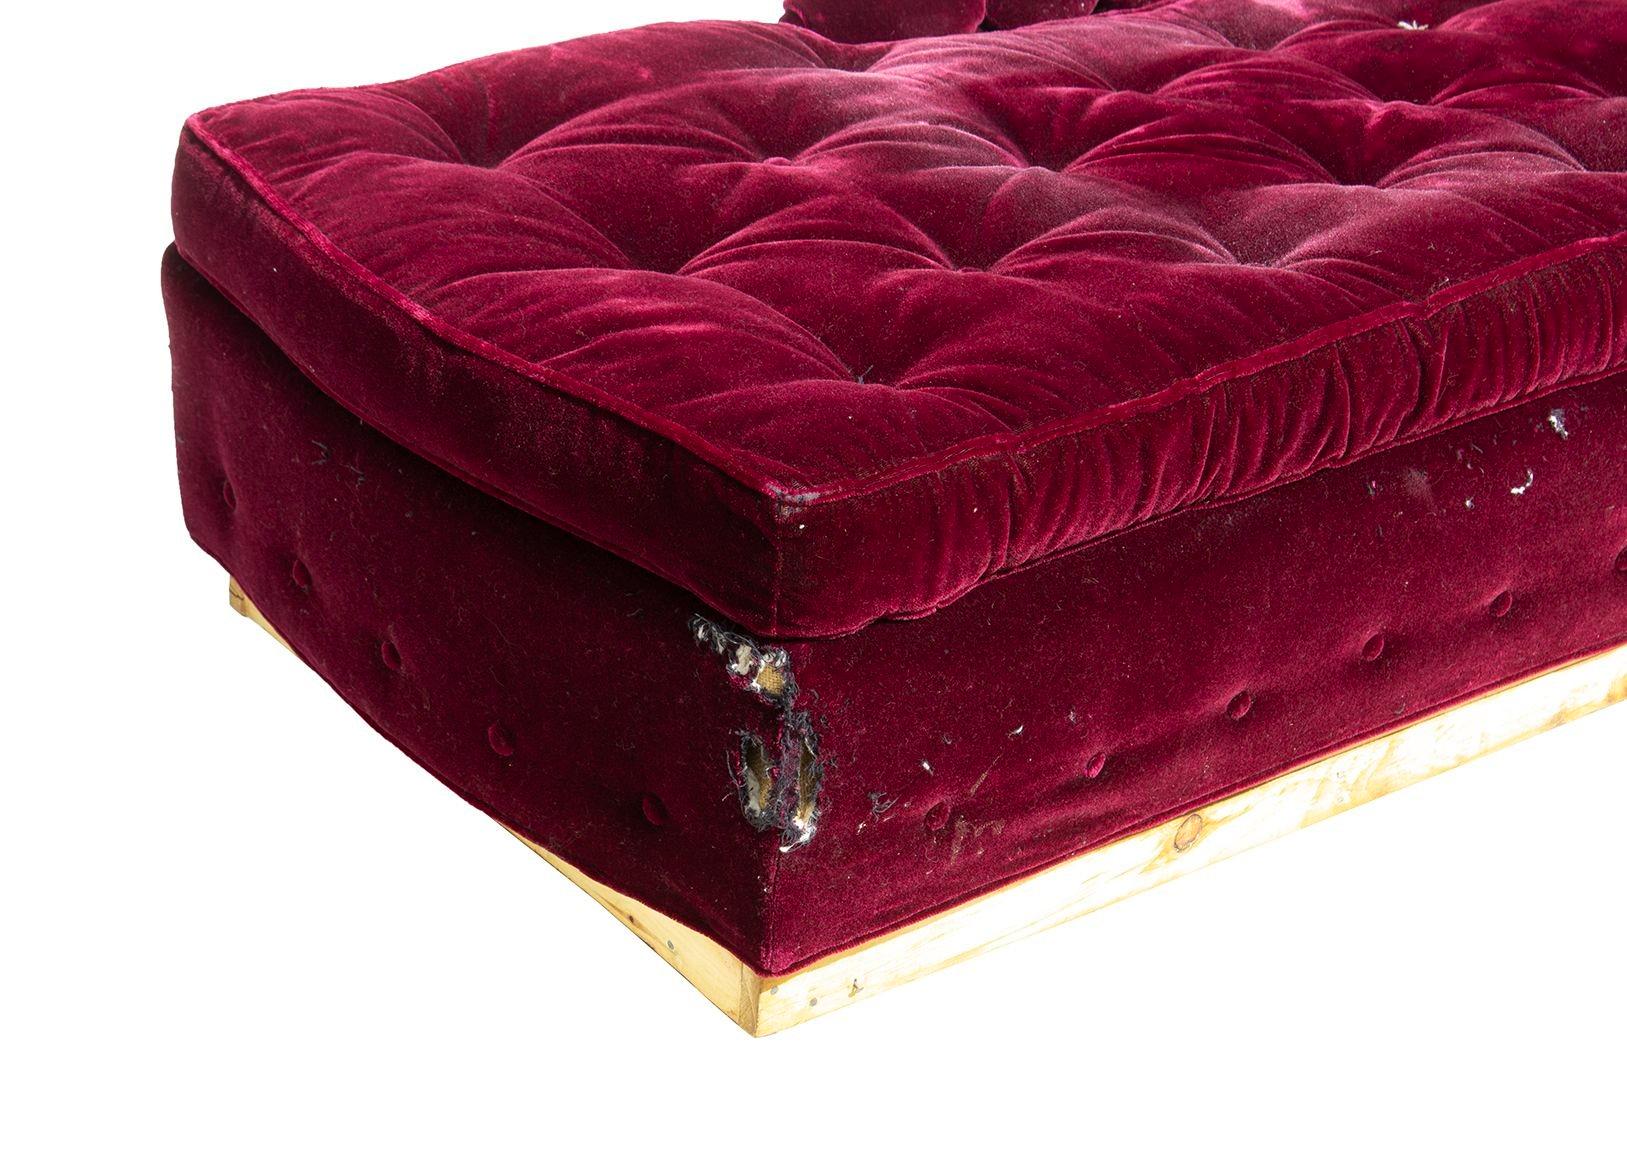 Hollywood Regency Tufted Chaise Lounge for Reupholstery